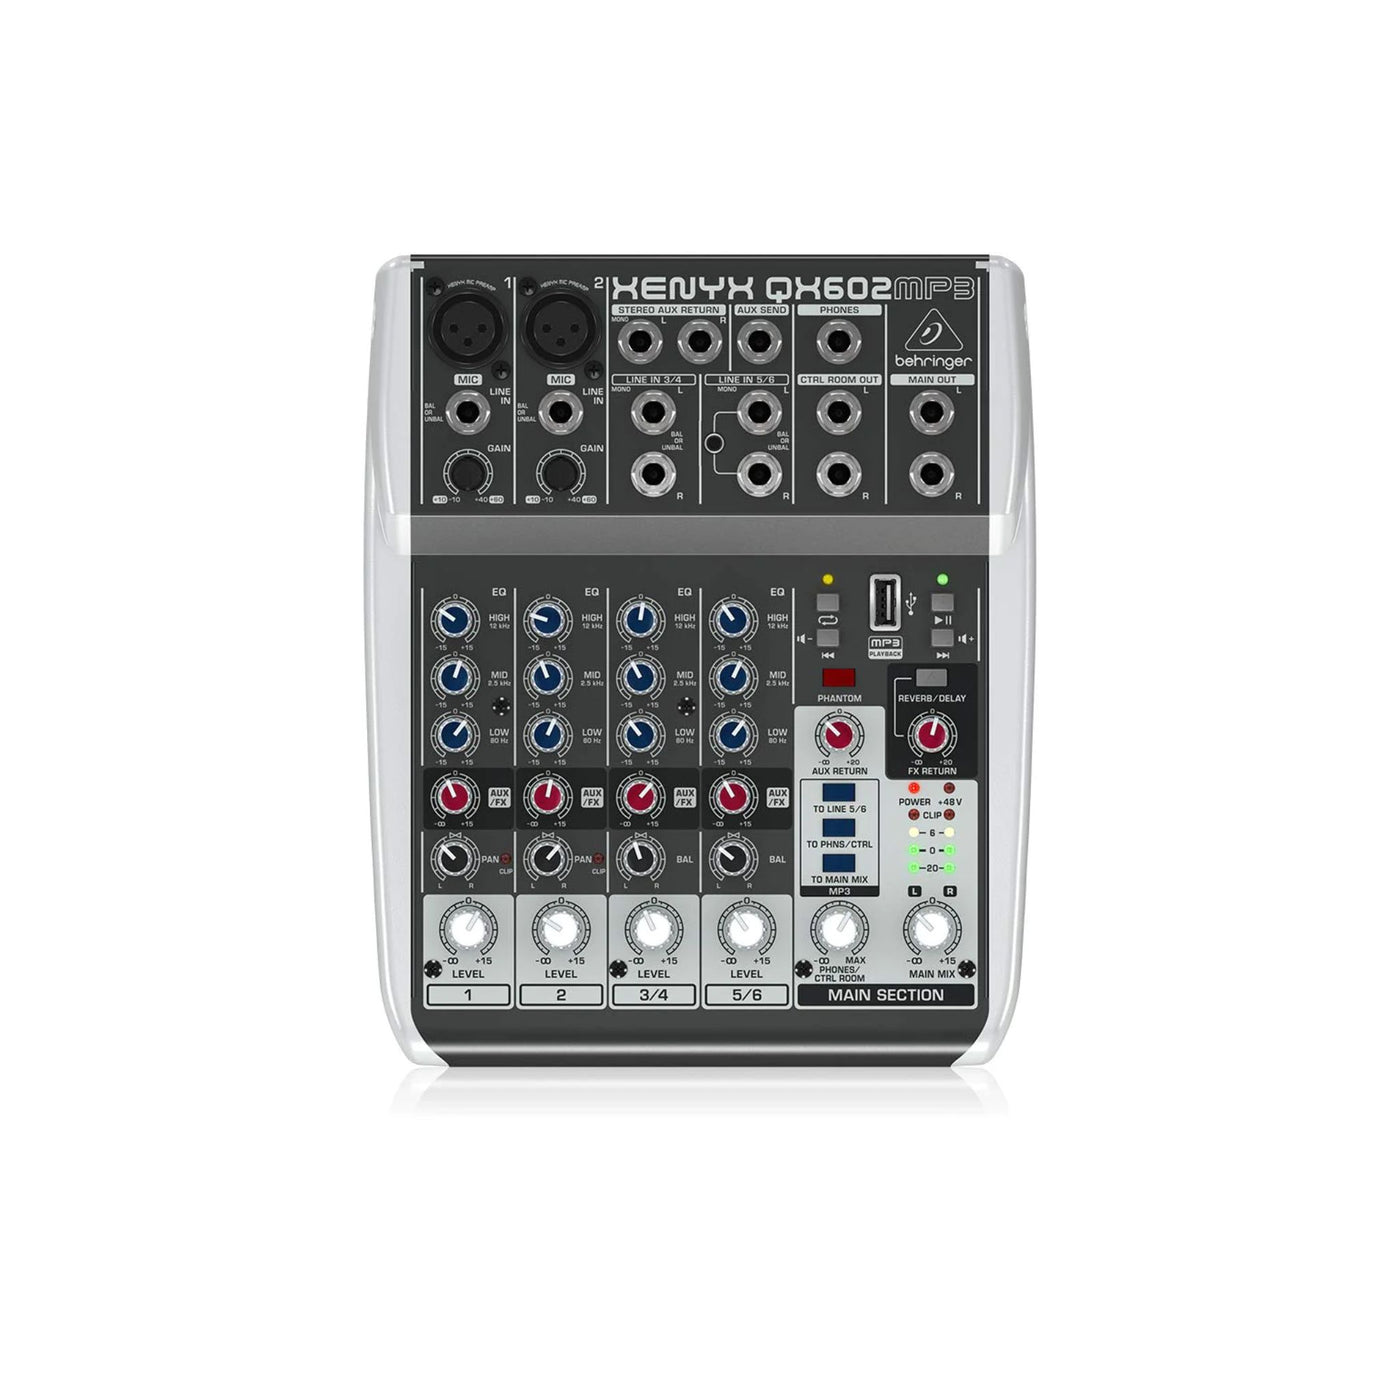 Behringer QX602MP3 Premium 6-Input 2-Bus Mixer with XENYX Mic Preamps